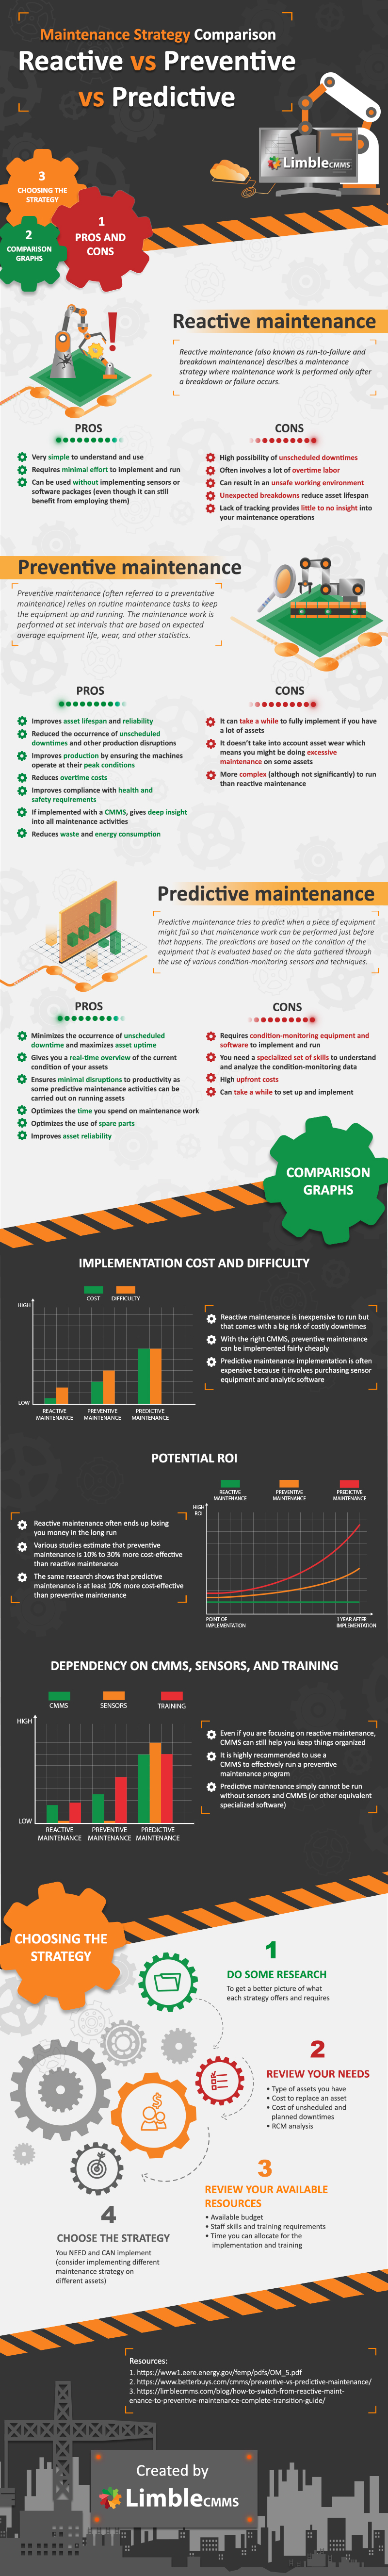 Comparison of 3 Alternate Maintenance Strategies: Pros and Cons - Infographic